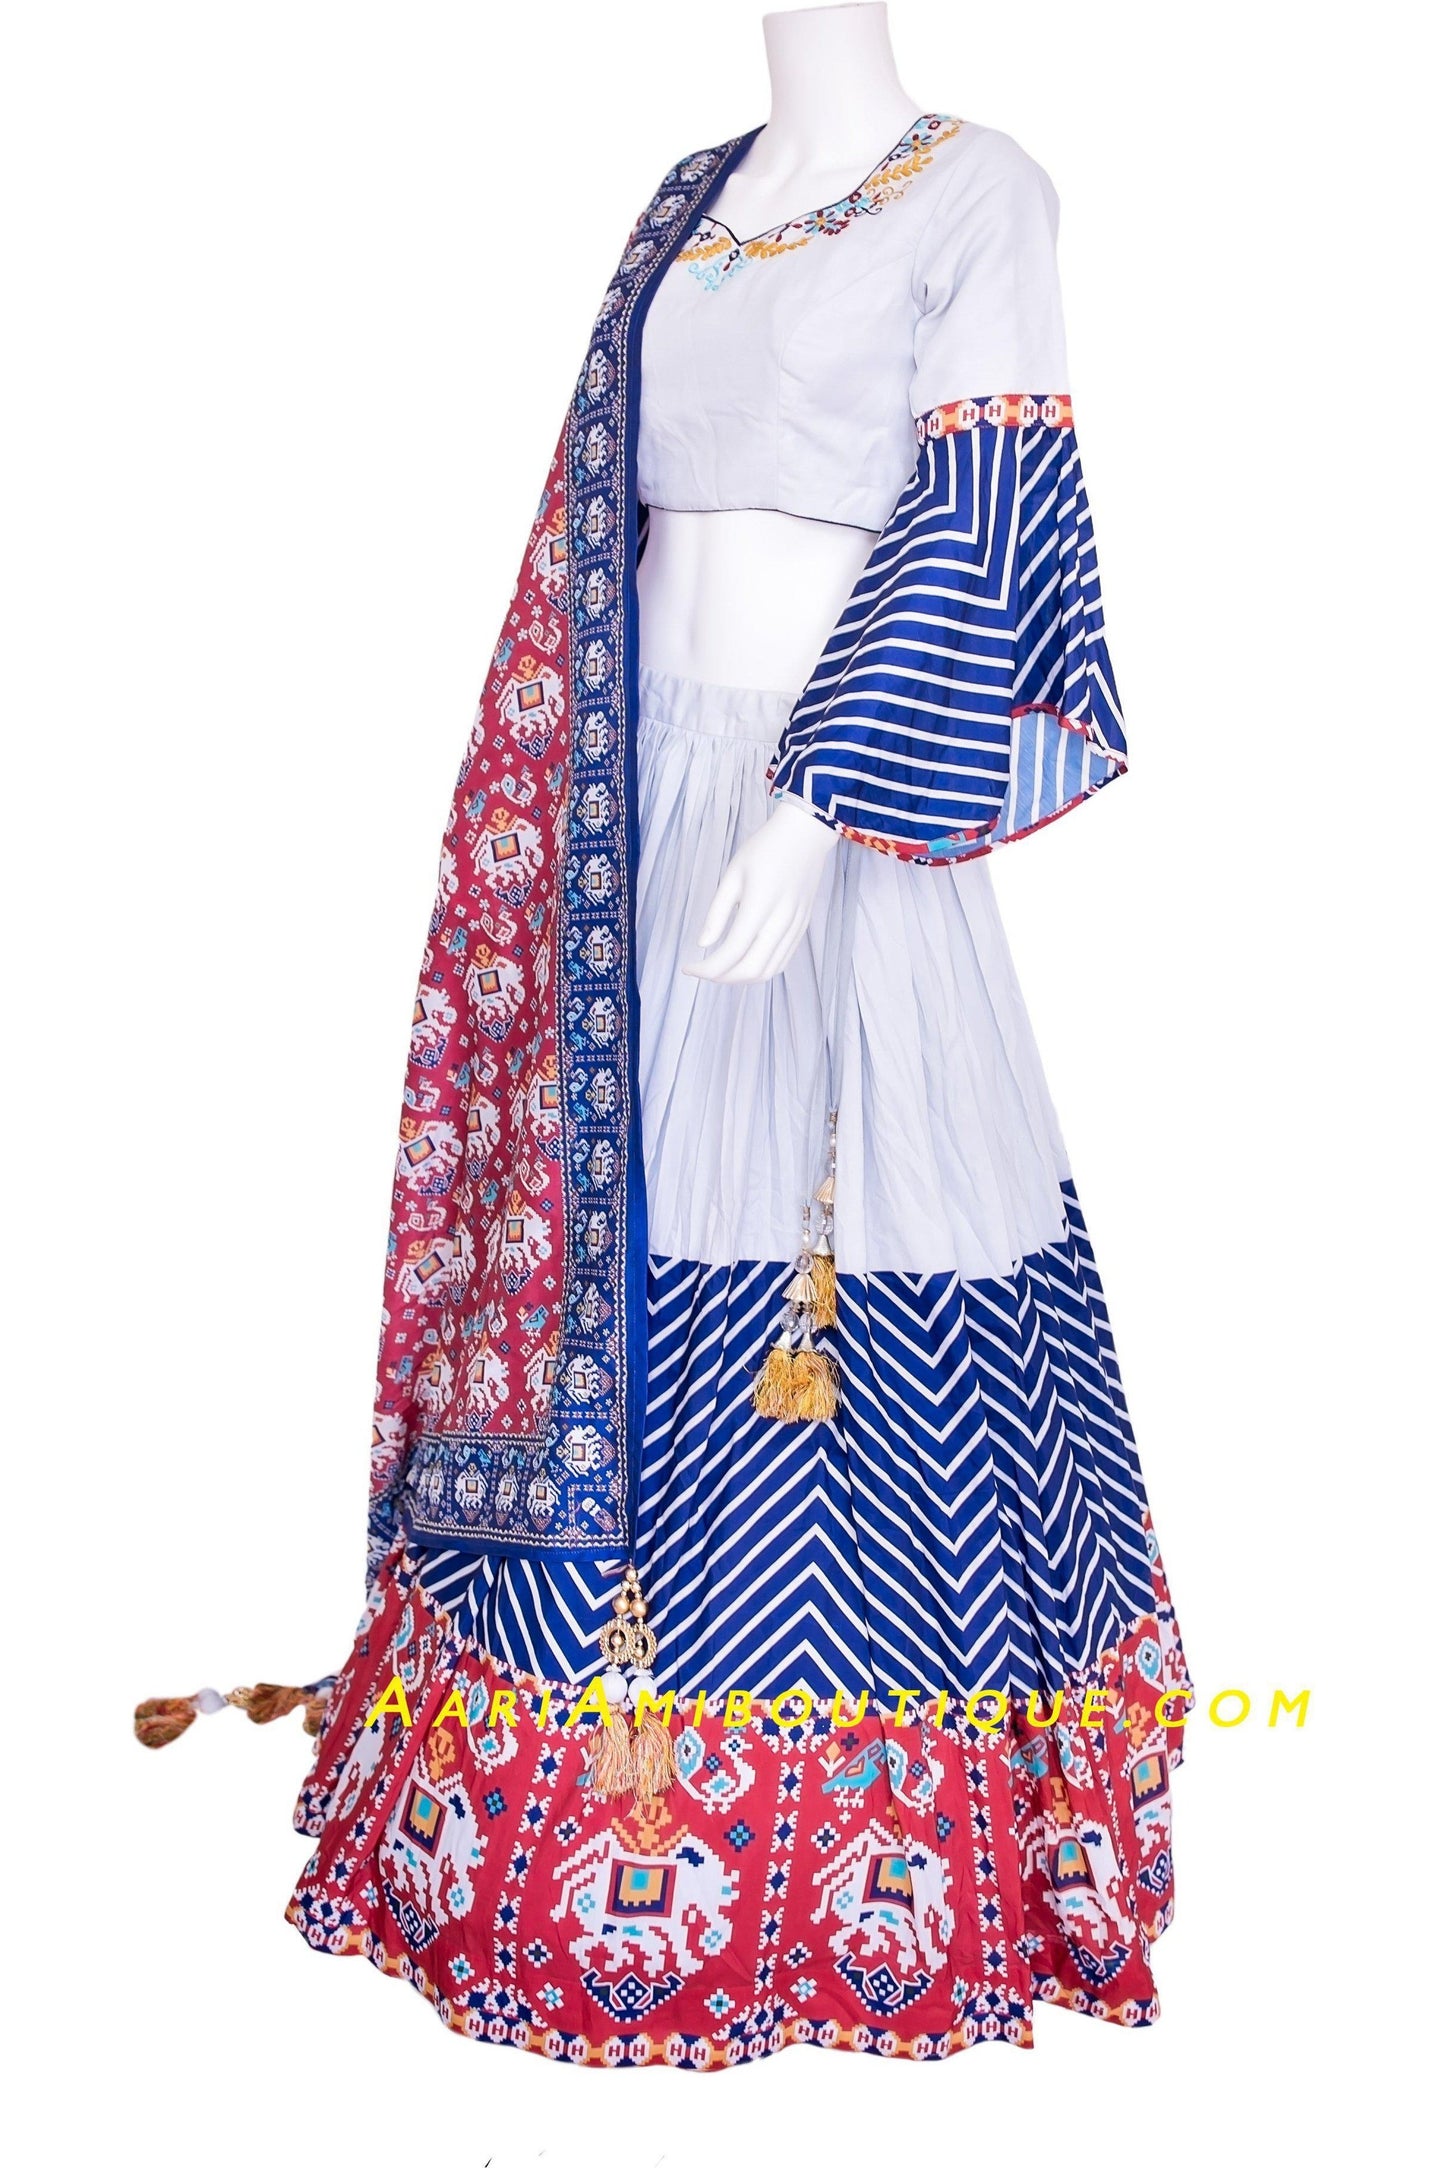 Off-White and Blue Embroidered Chaniya Choli Set-AariAmi Boutique